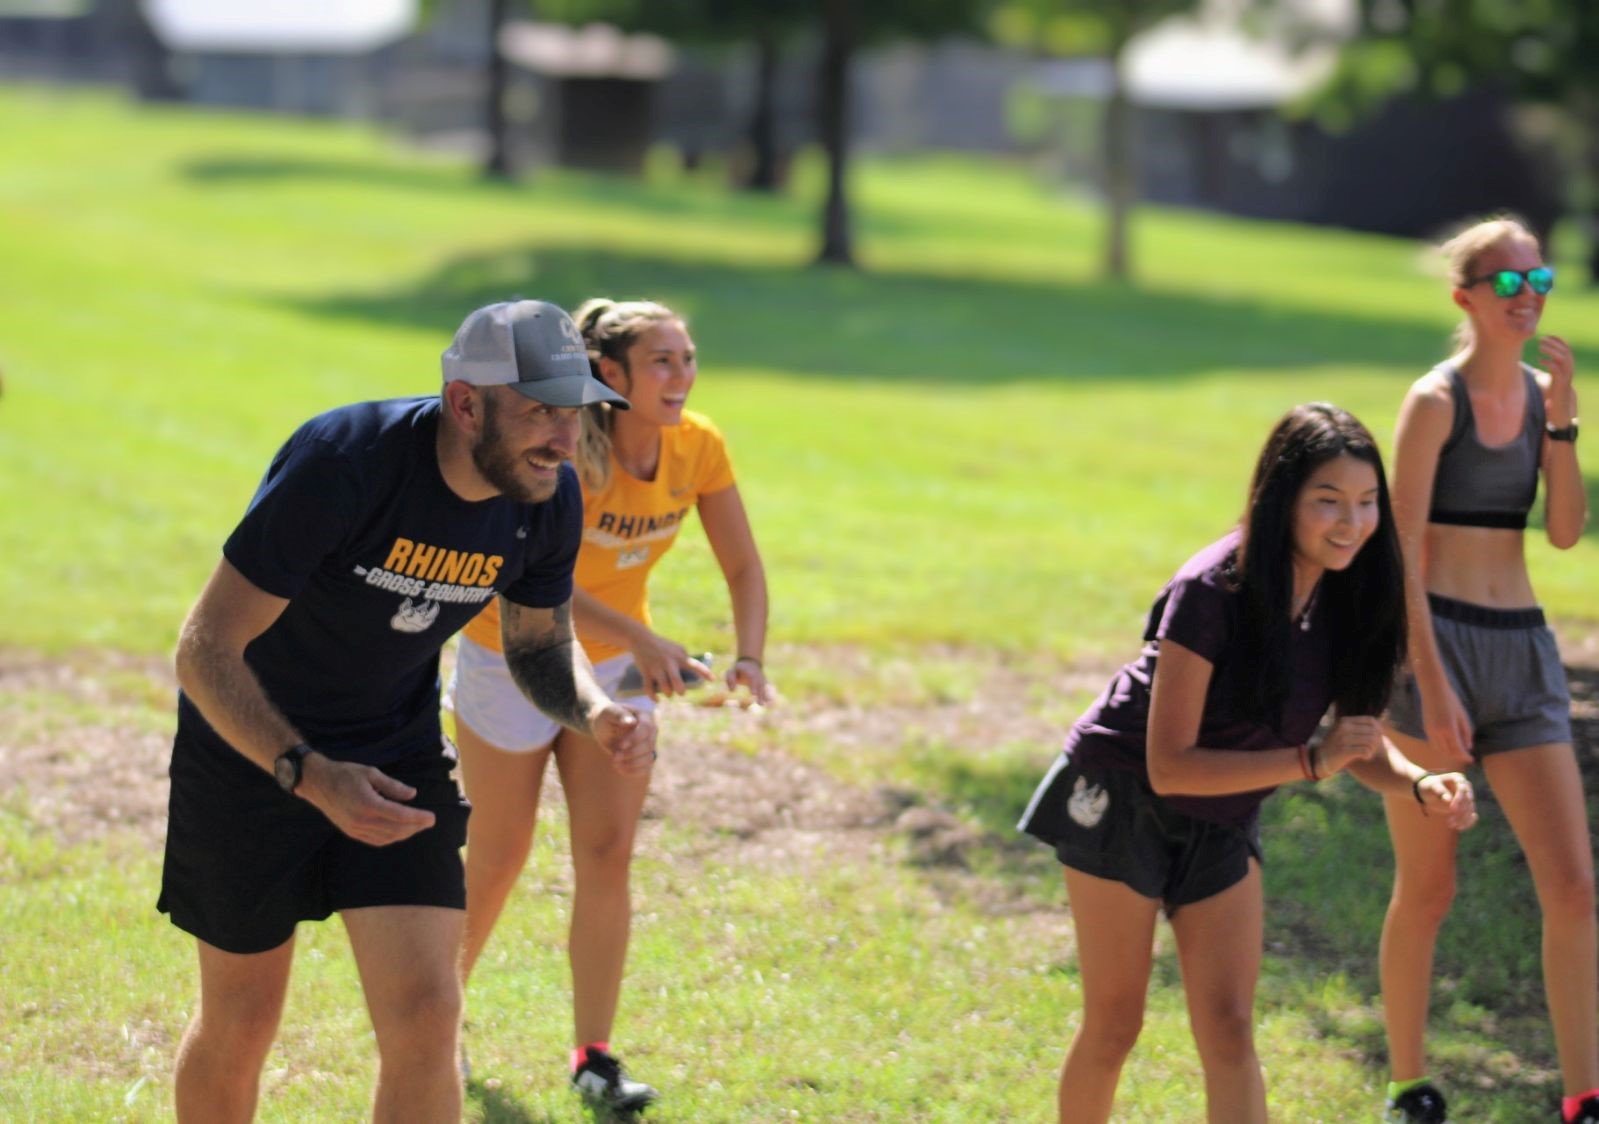 Gaston College women's cross country coach Kody Kubbs (far left) during a recent Rhinos' practice session.